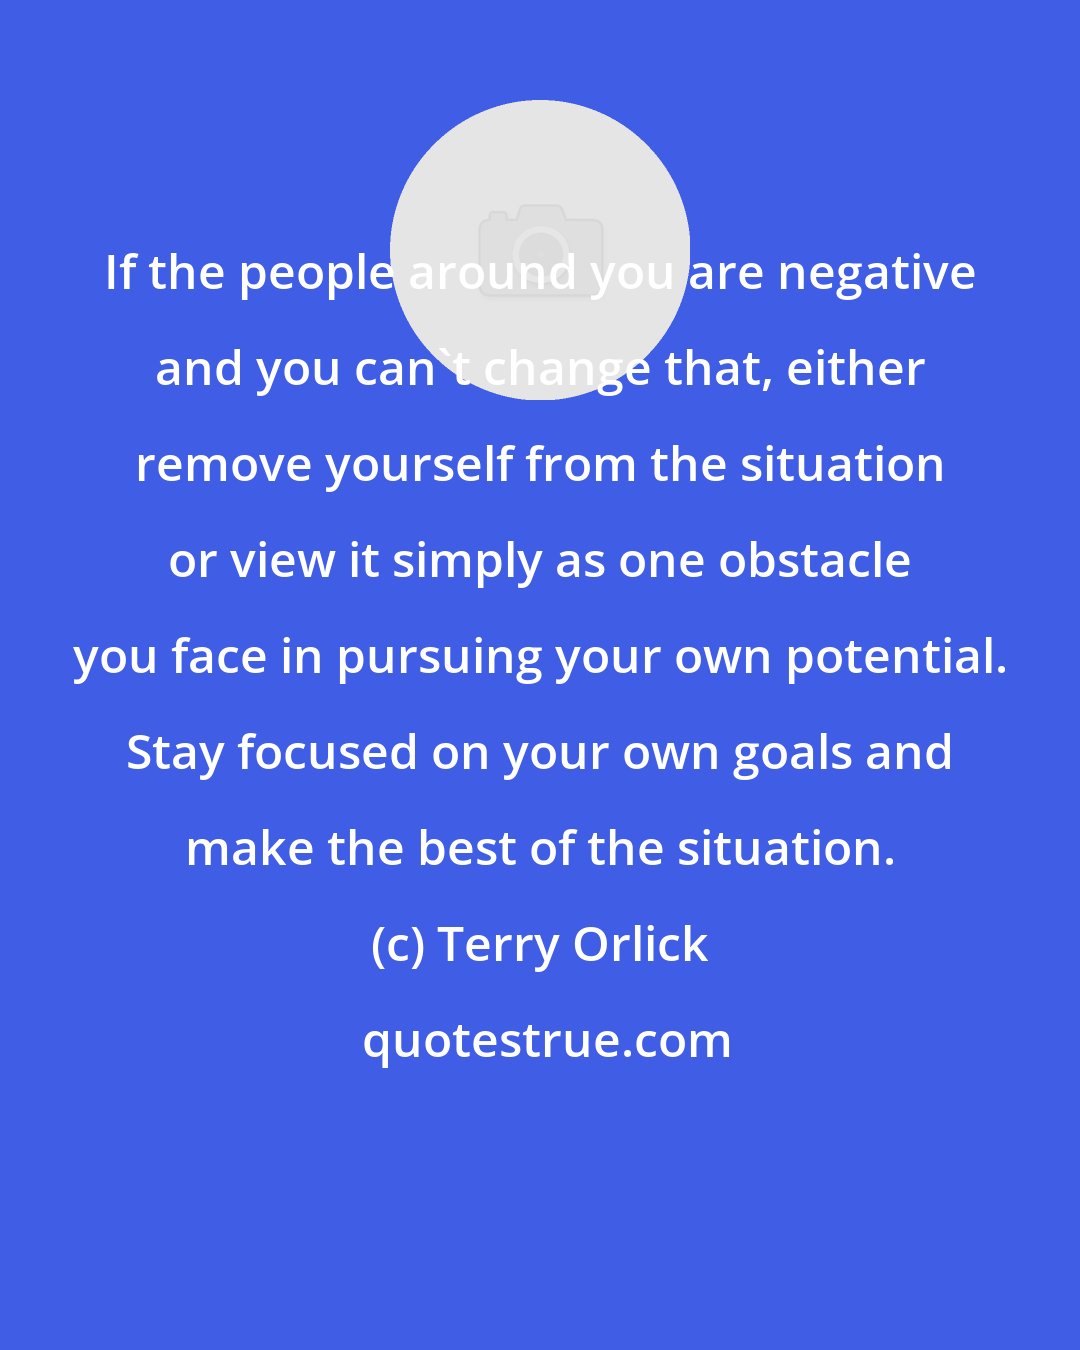 Terry Orlick: If the people around you are negative and you can't change that, either remove yourself from the situation or view it simply as one obstacle you face in pursuing your own potential. Stay focused on your own goals and make the best of the situation.